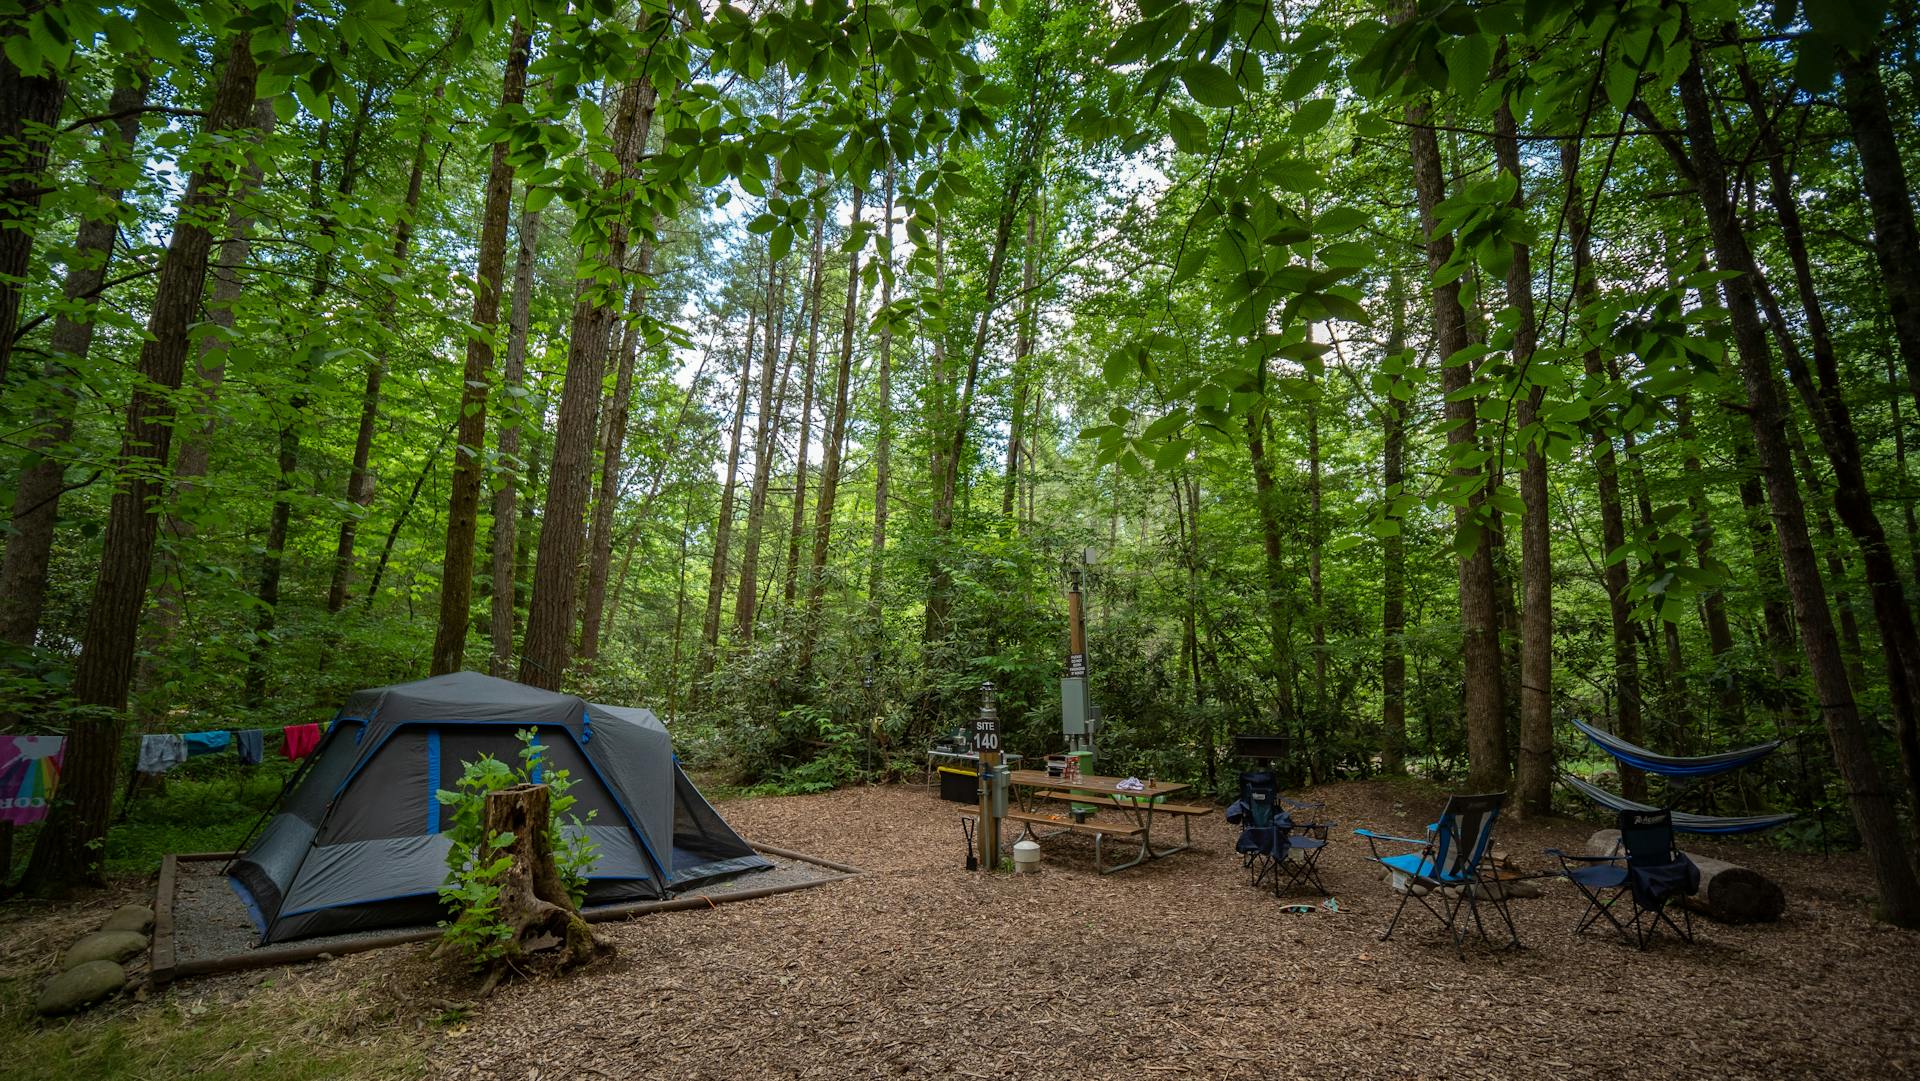 September: New Campgrounds added on Campspot